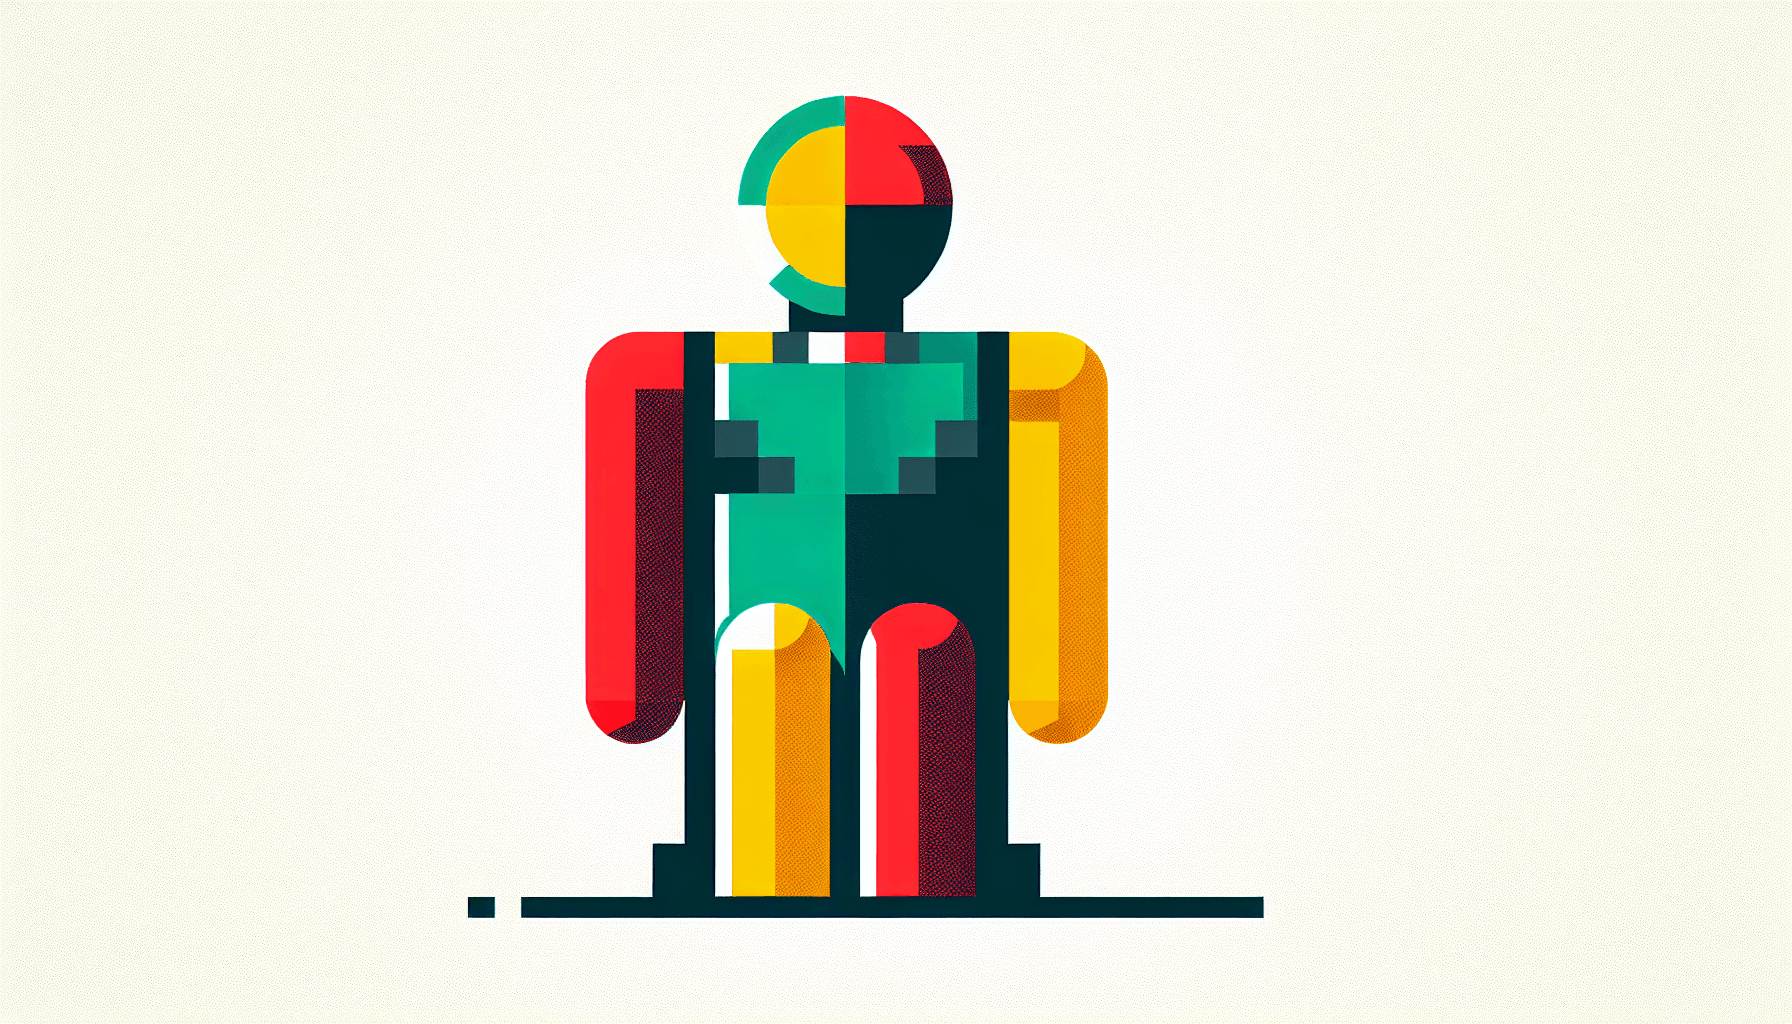 Crash test dummy in flat illustration style and white background, red #f47574, green #88c7a8, yellow #fcc44b, and blue #645bc8 colors.